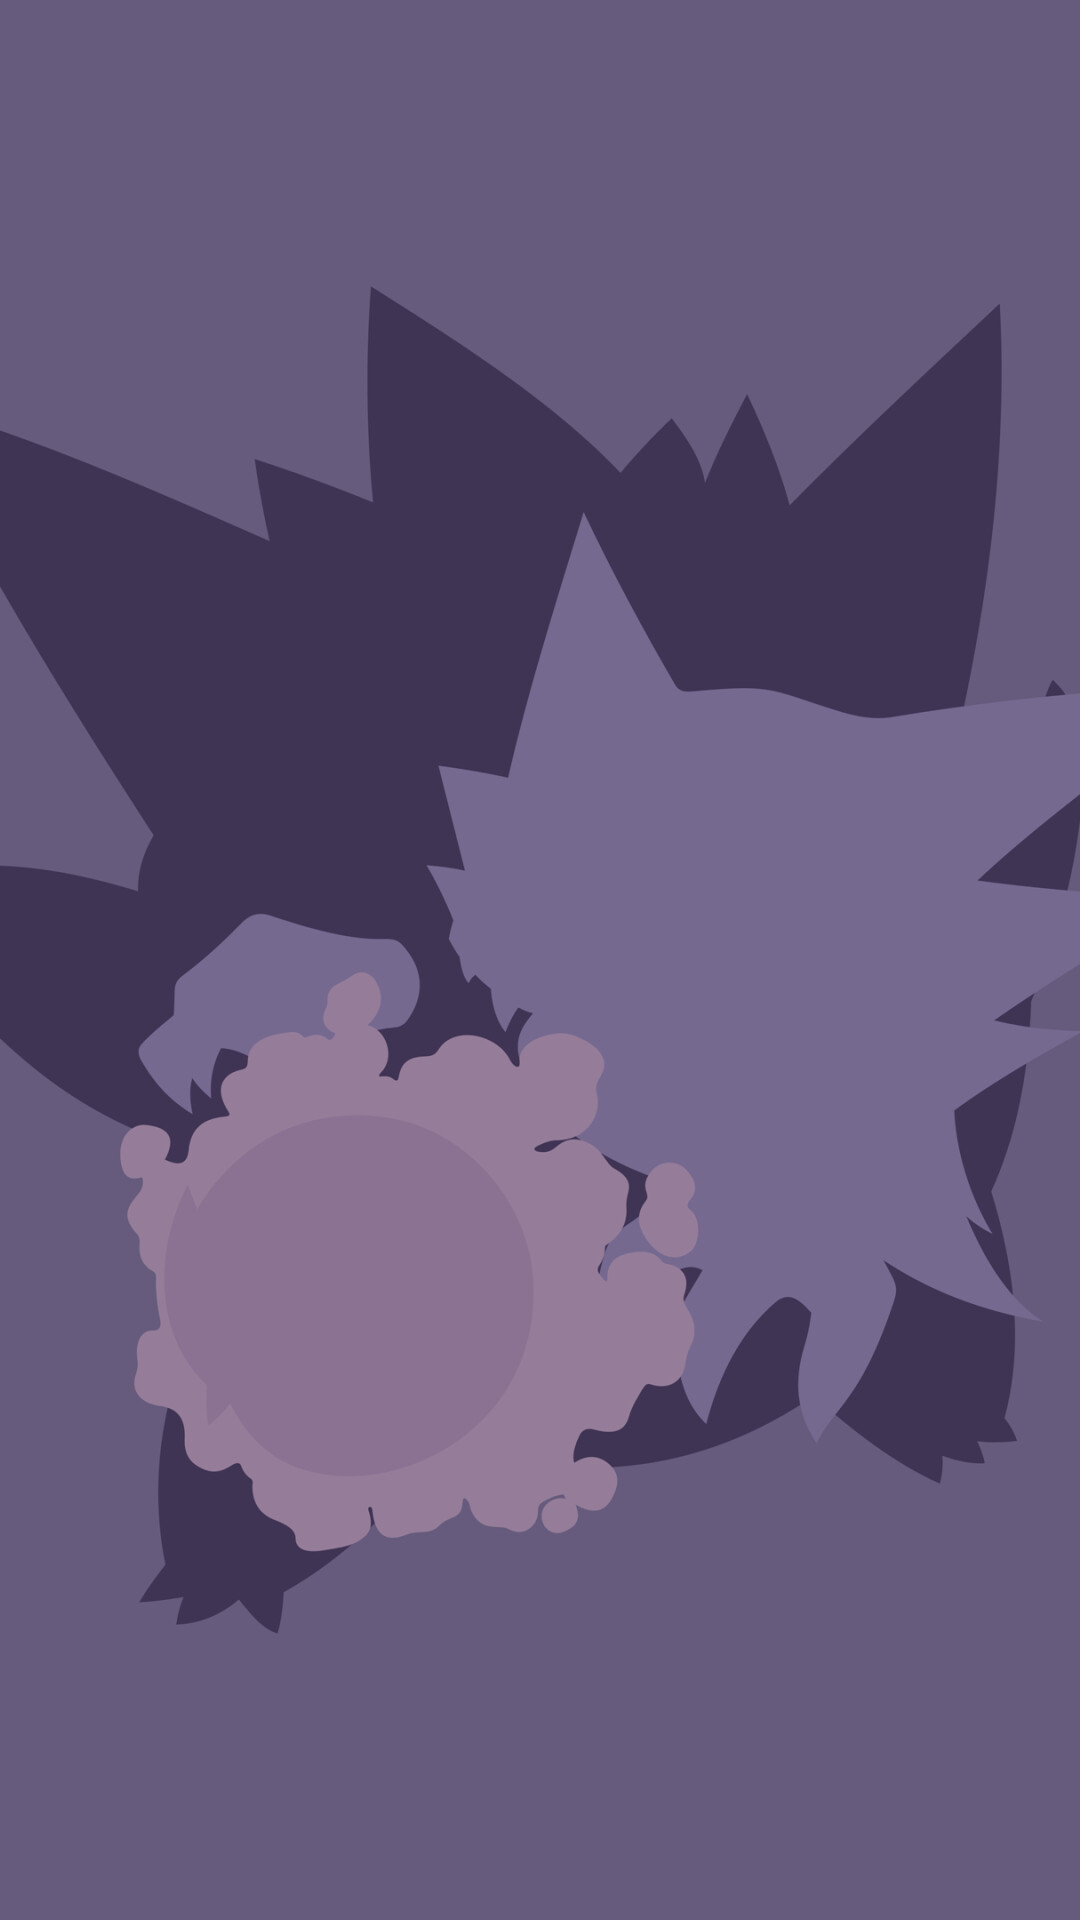 Ghost Pokemon: Shadow Claw is a damage-dealing Ghost-type move introduced in Generation IV. 1080x1920 Full HD Wallpaper.